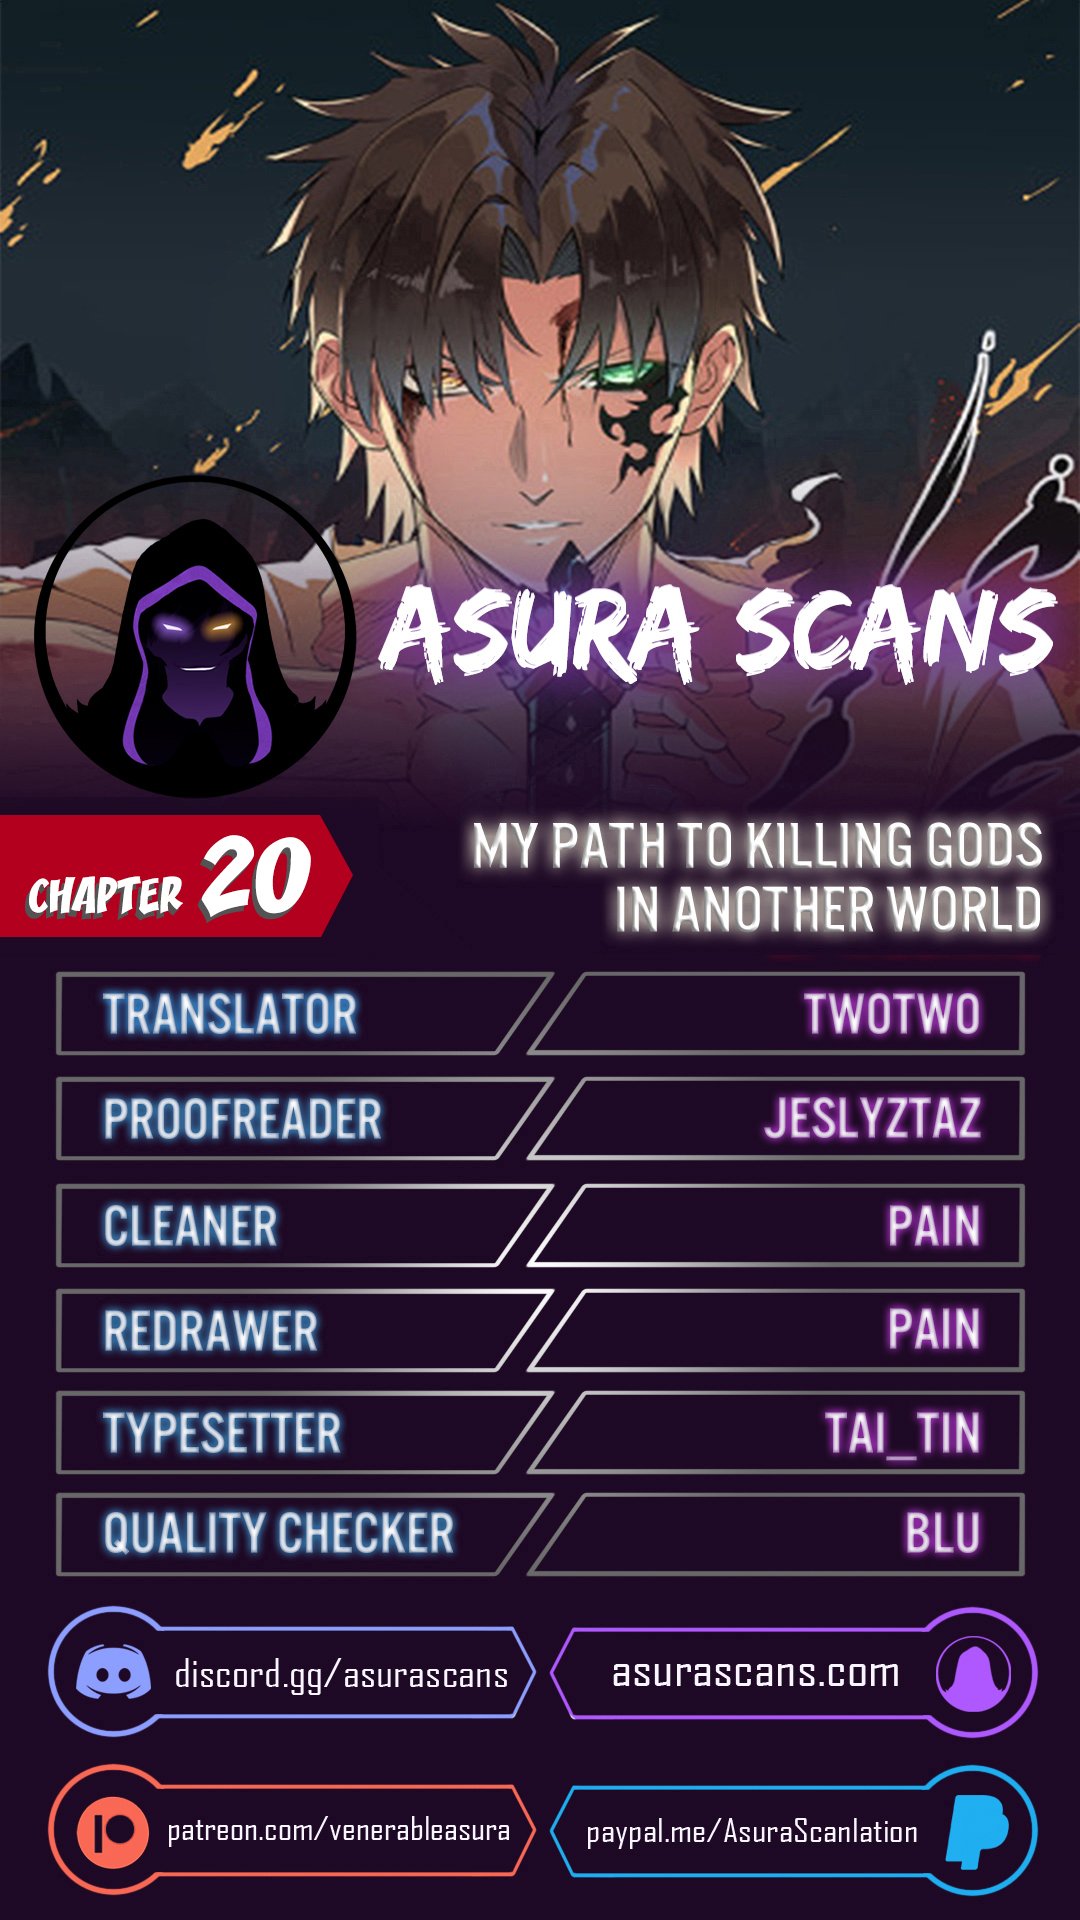 My Path to Killing Gods in Another World - Chapter 23171 - Image 1